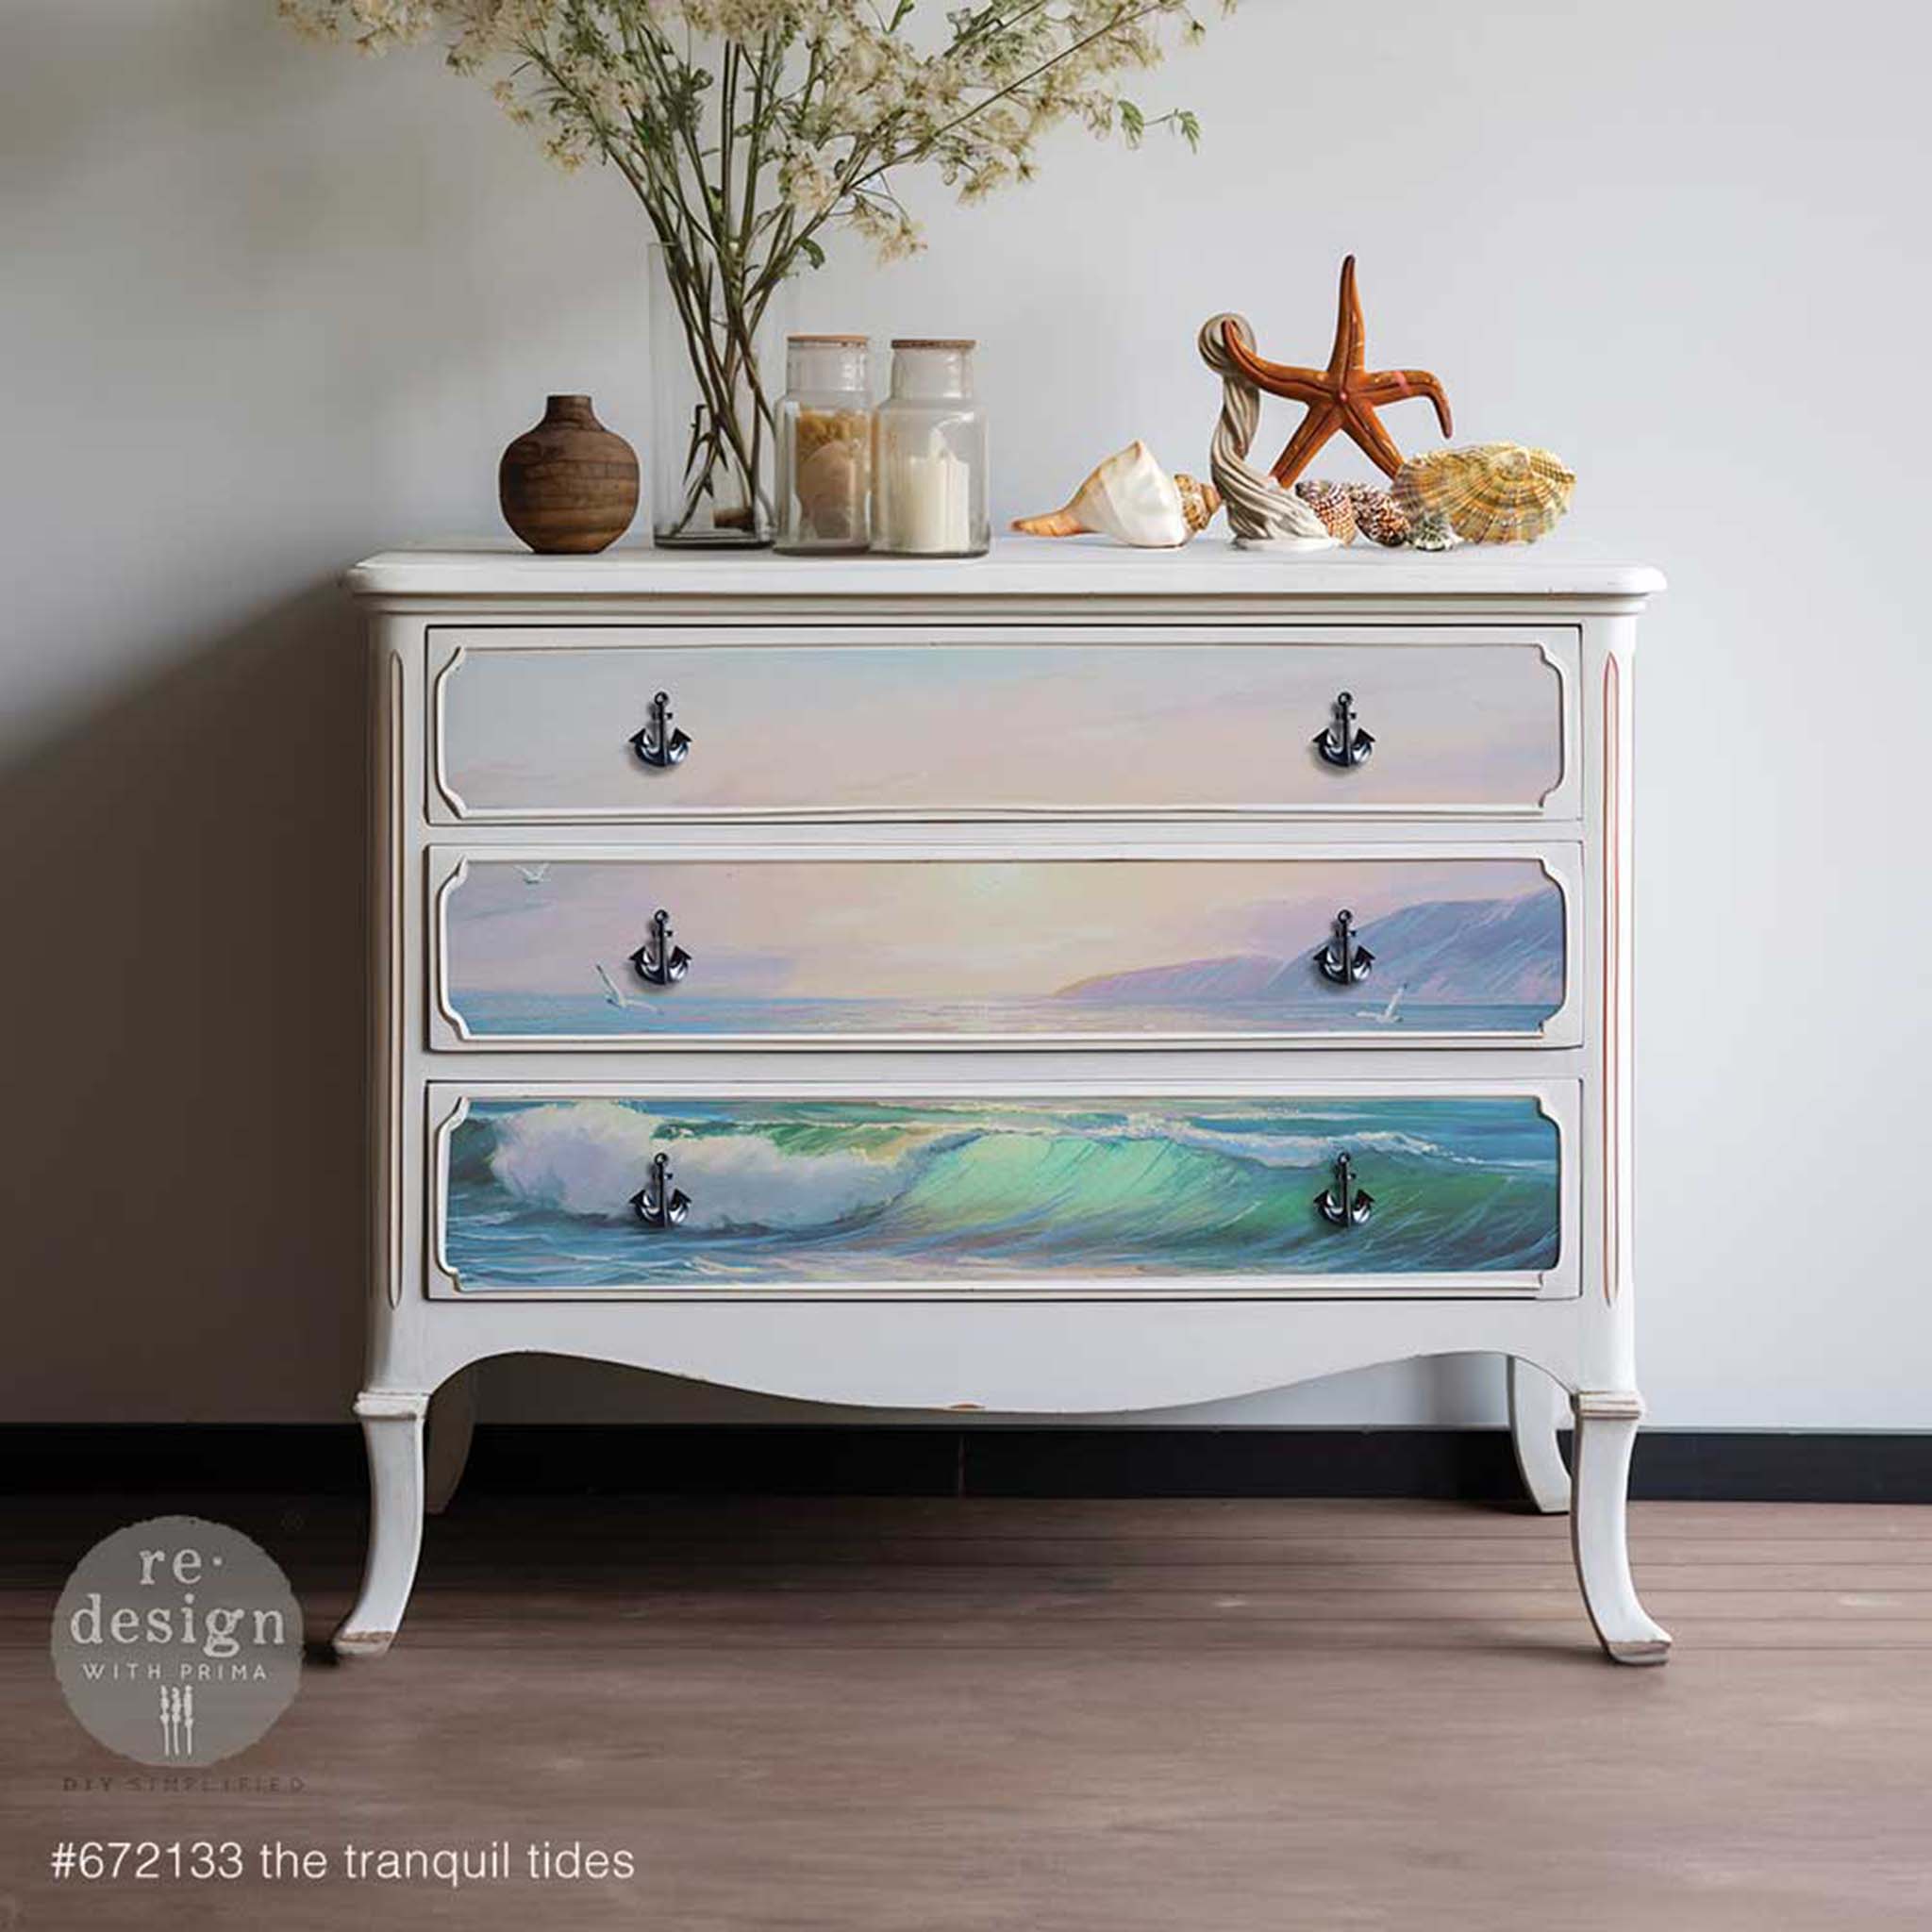 A vintage 3-drawer dresser is painted white and features ReDesign with Prima's Tranquil Tides A1 fiber paper on the drawers.